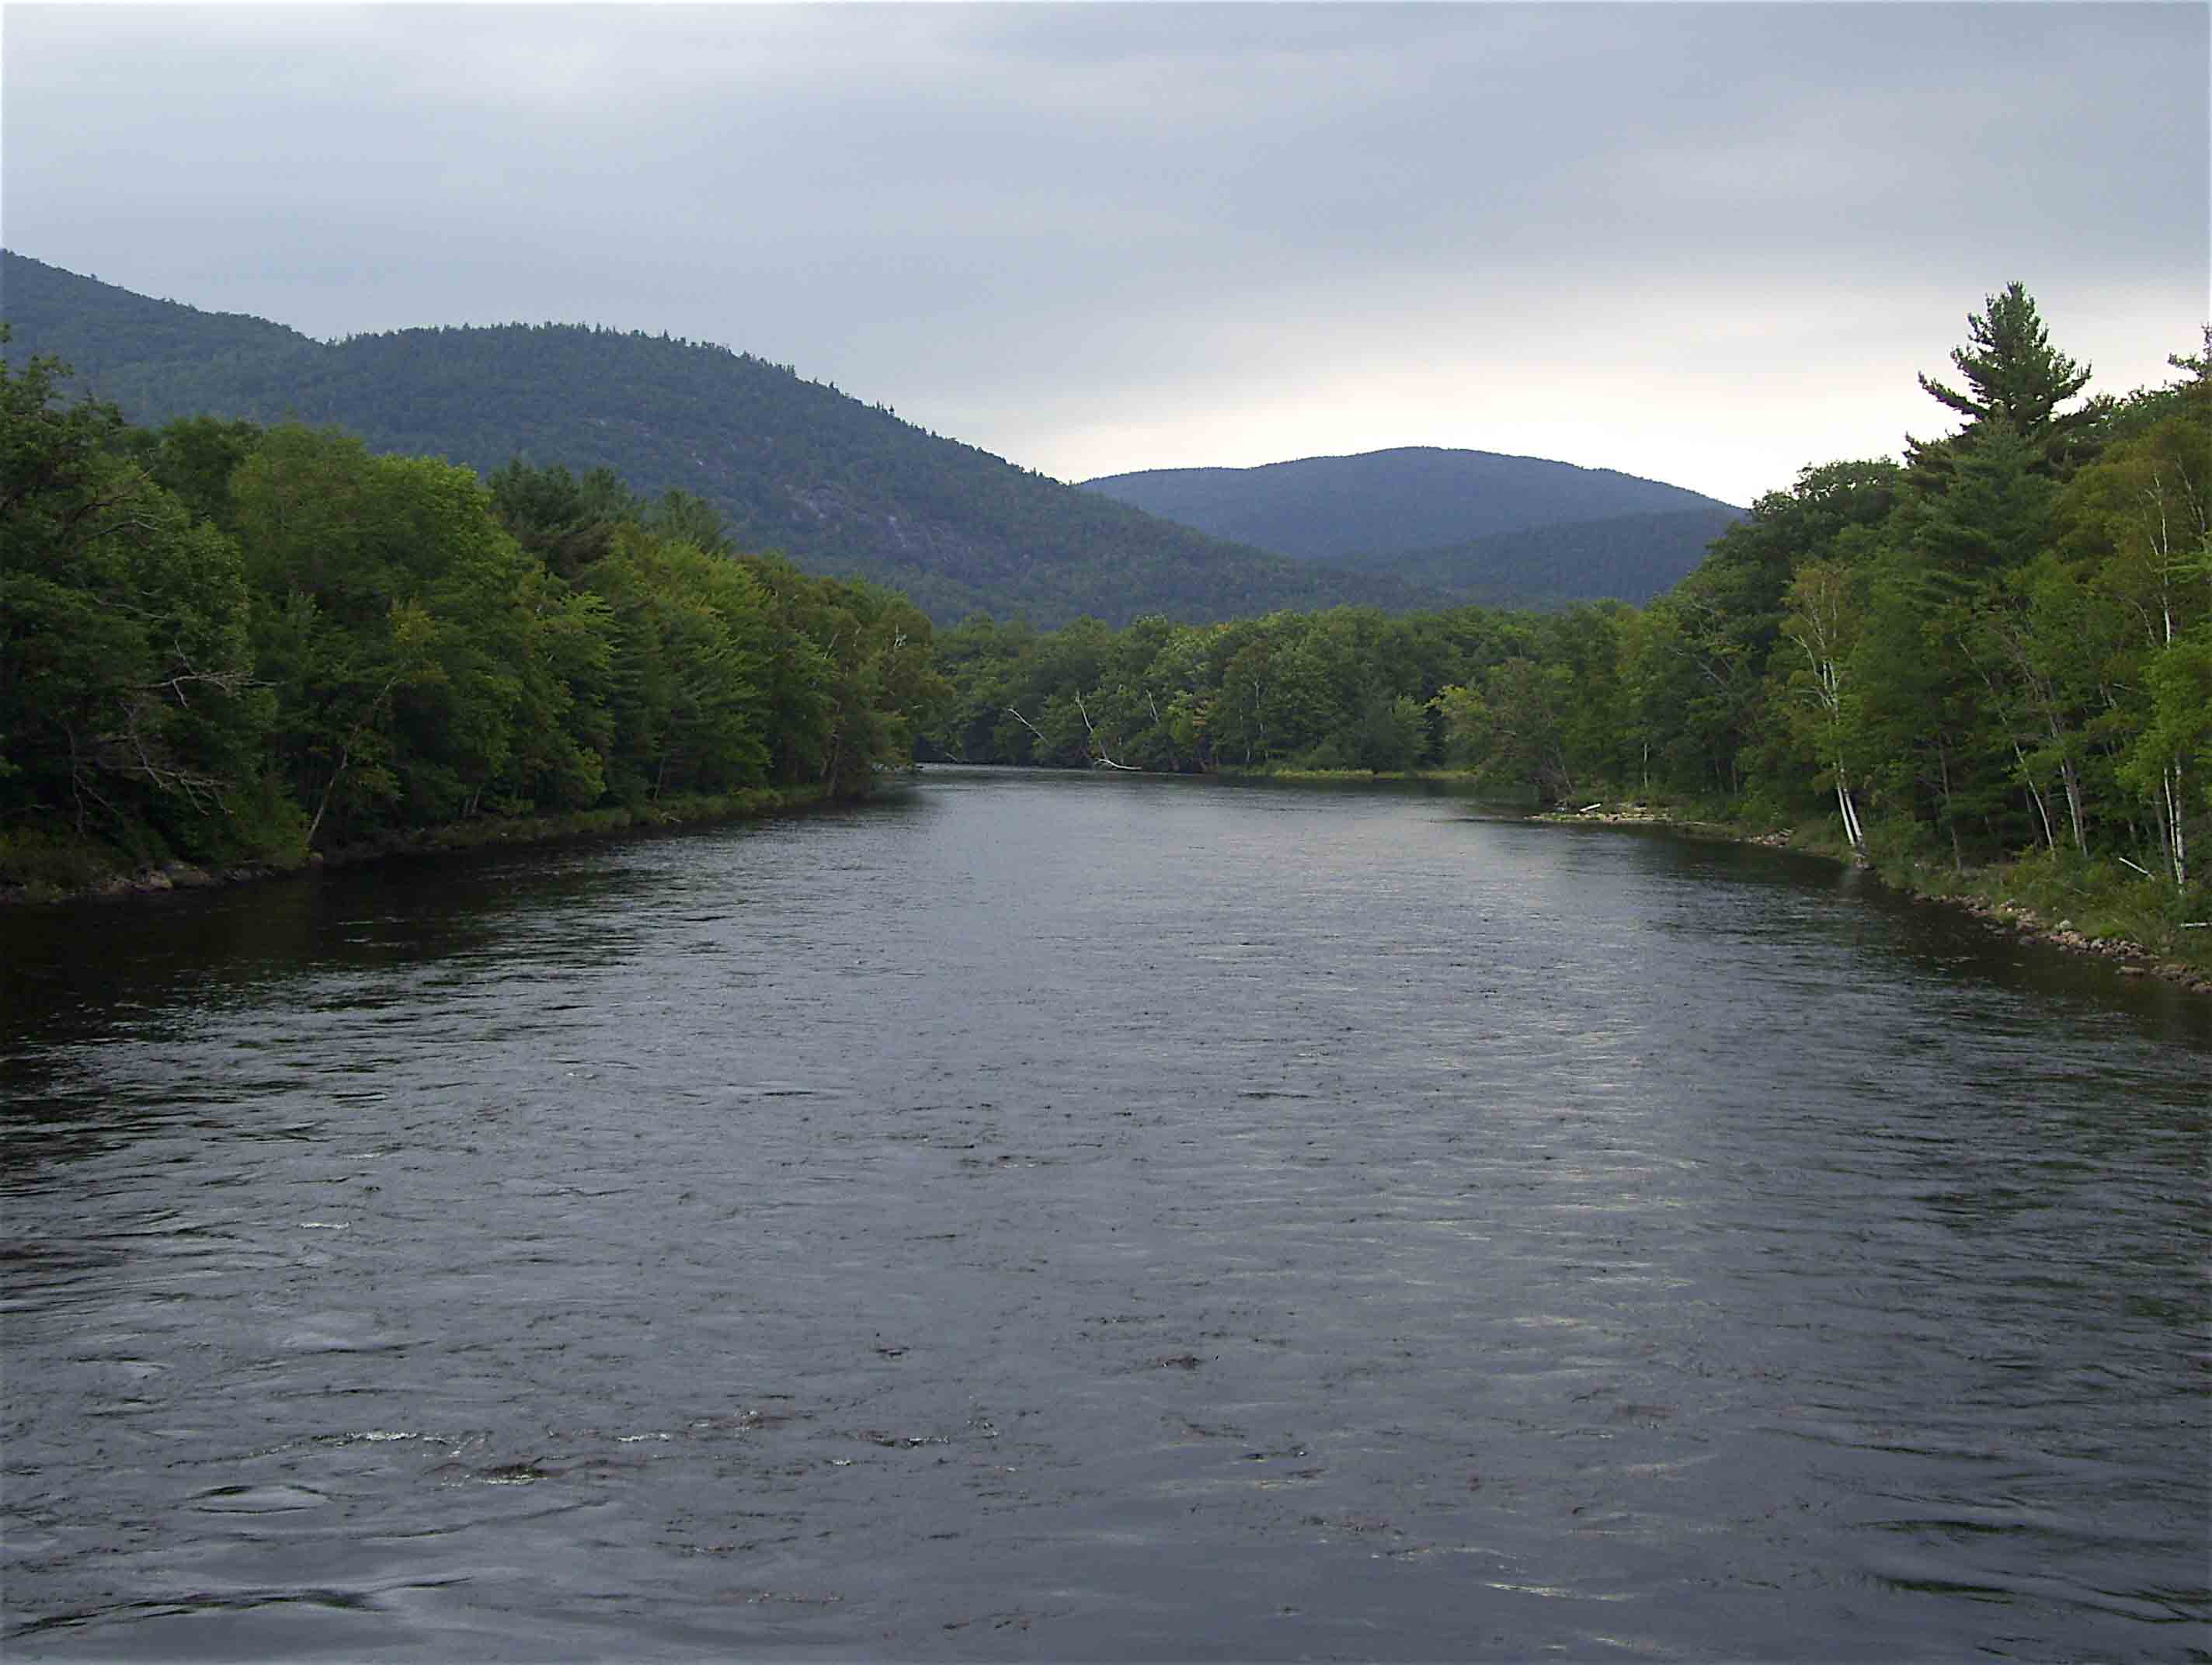 mm 16.2  Looking west from the North Road Bridge. The river is dammed here. If it had been a clear day, some of the Presidential Range would be visible.   Courtesy dlcul@conncoll.edu